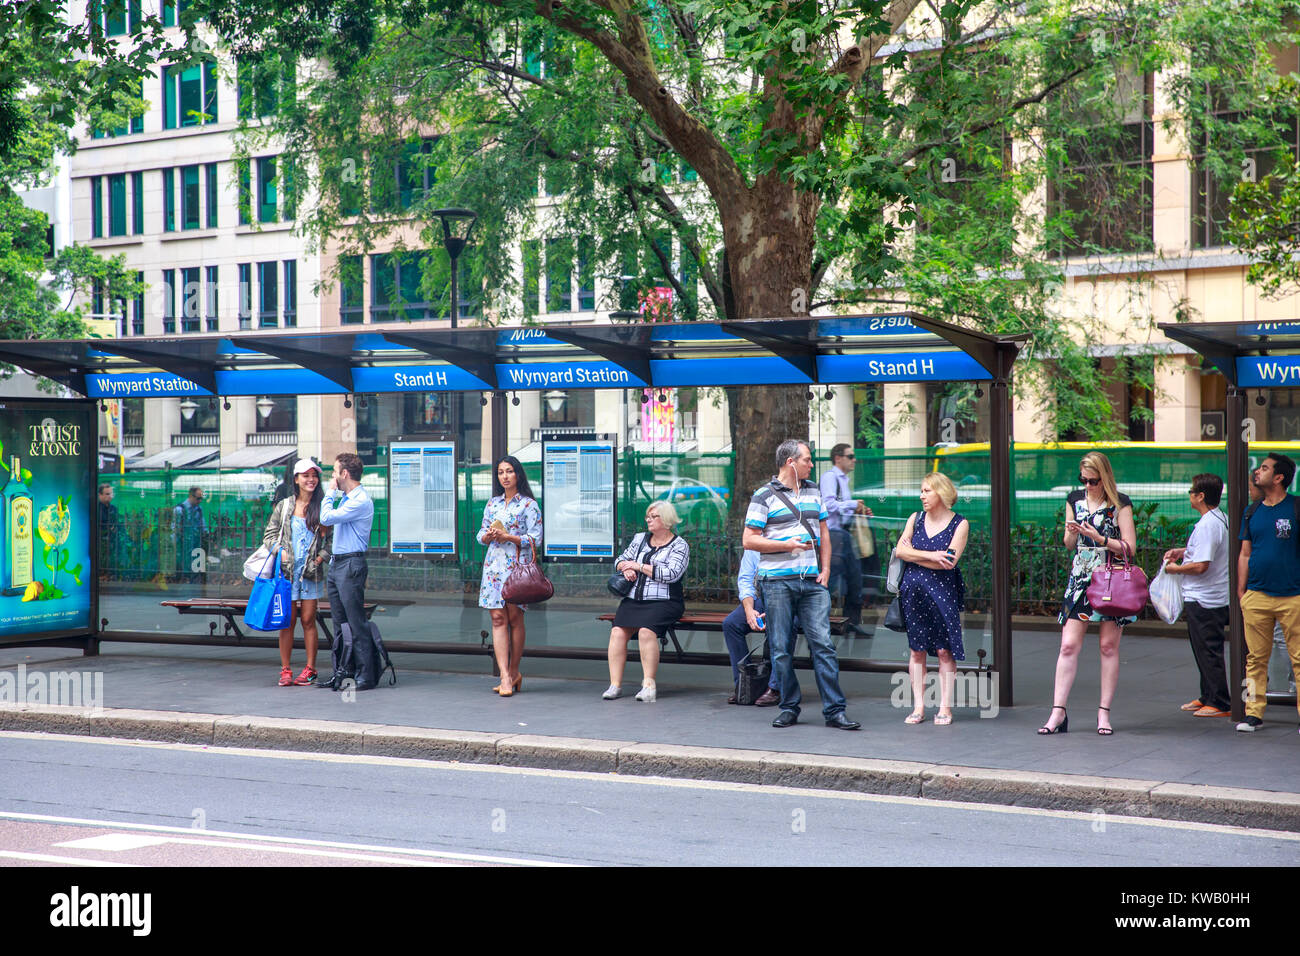 People in Sydney waiting for a bus stood at Wynyard bus stop in york street,Sydney city centre,Australia Stock Photo